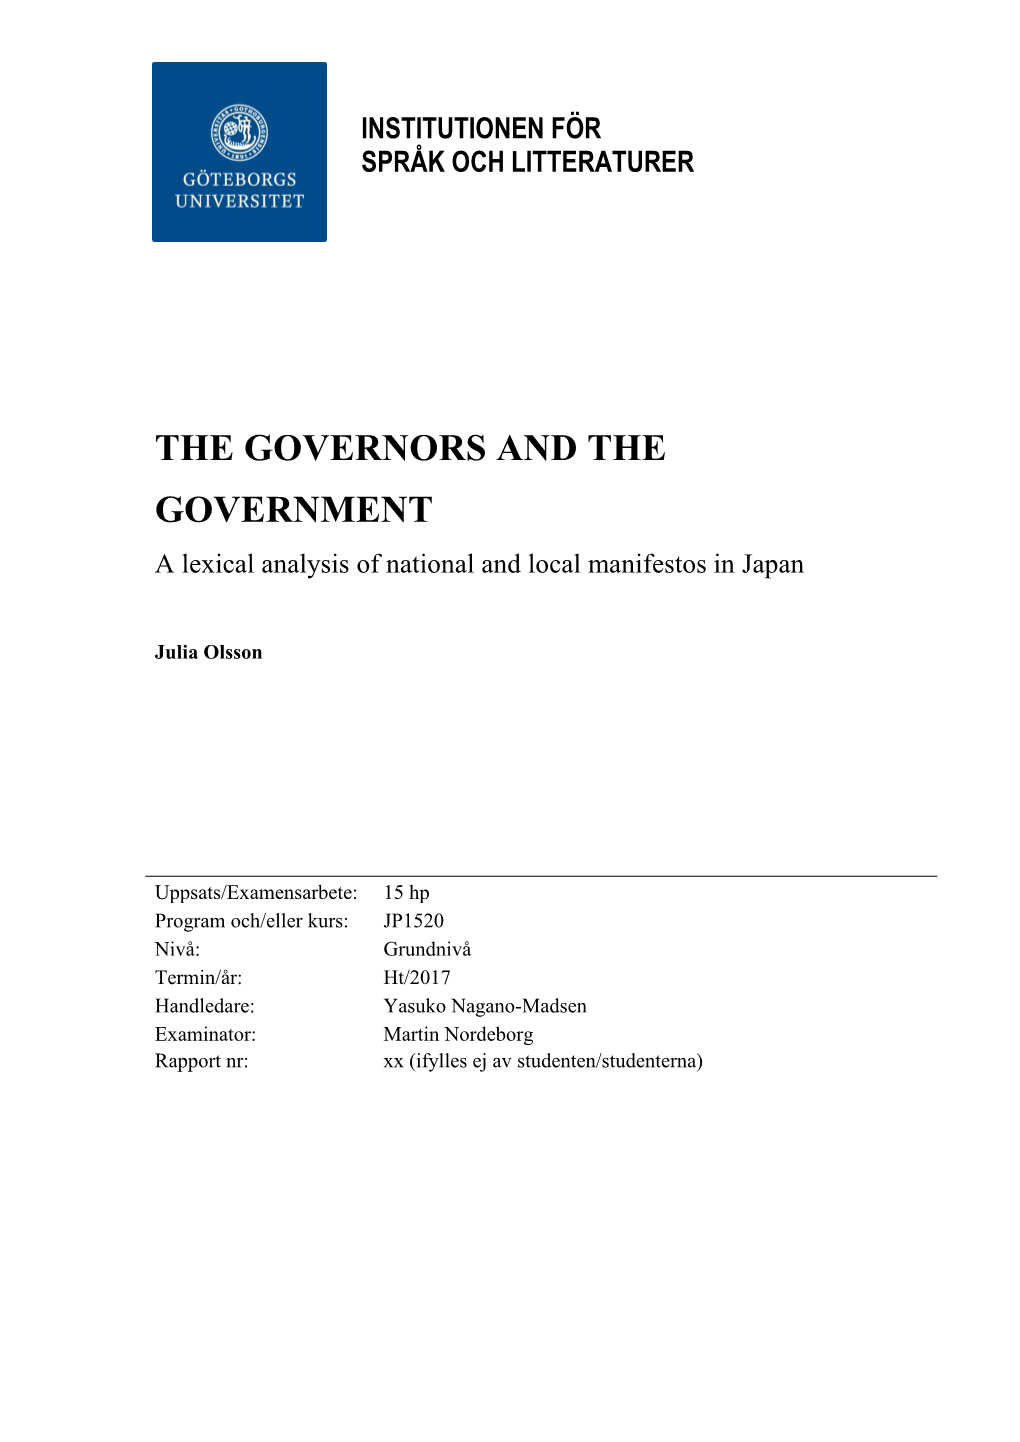 THE GOVERNORS and the GOVERNMENT a Lexical Analysis of National and Local Manifestos in Japan